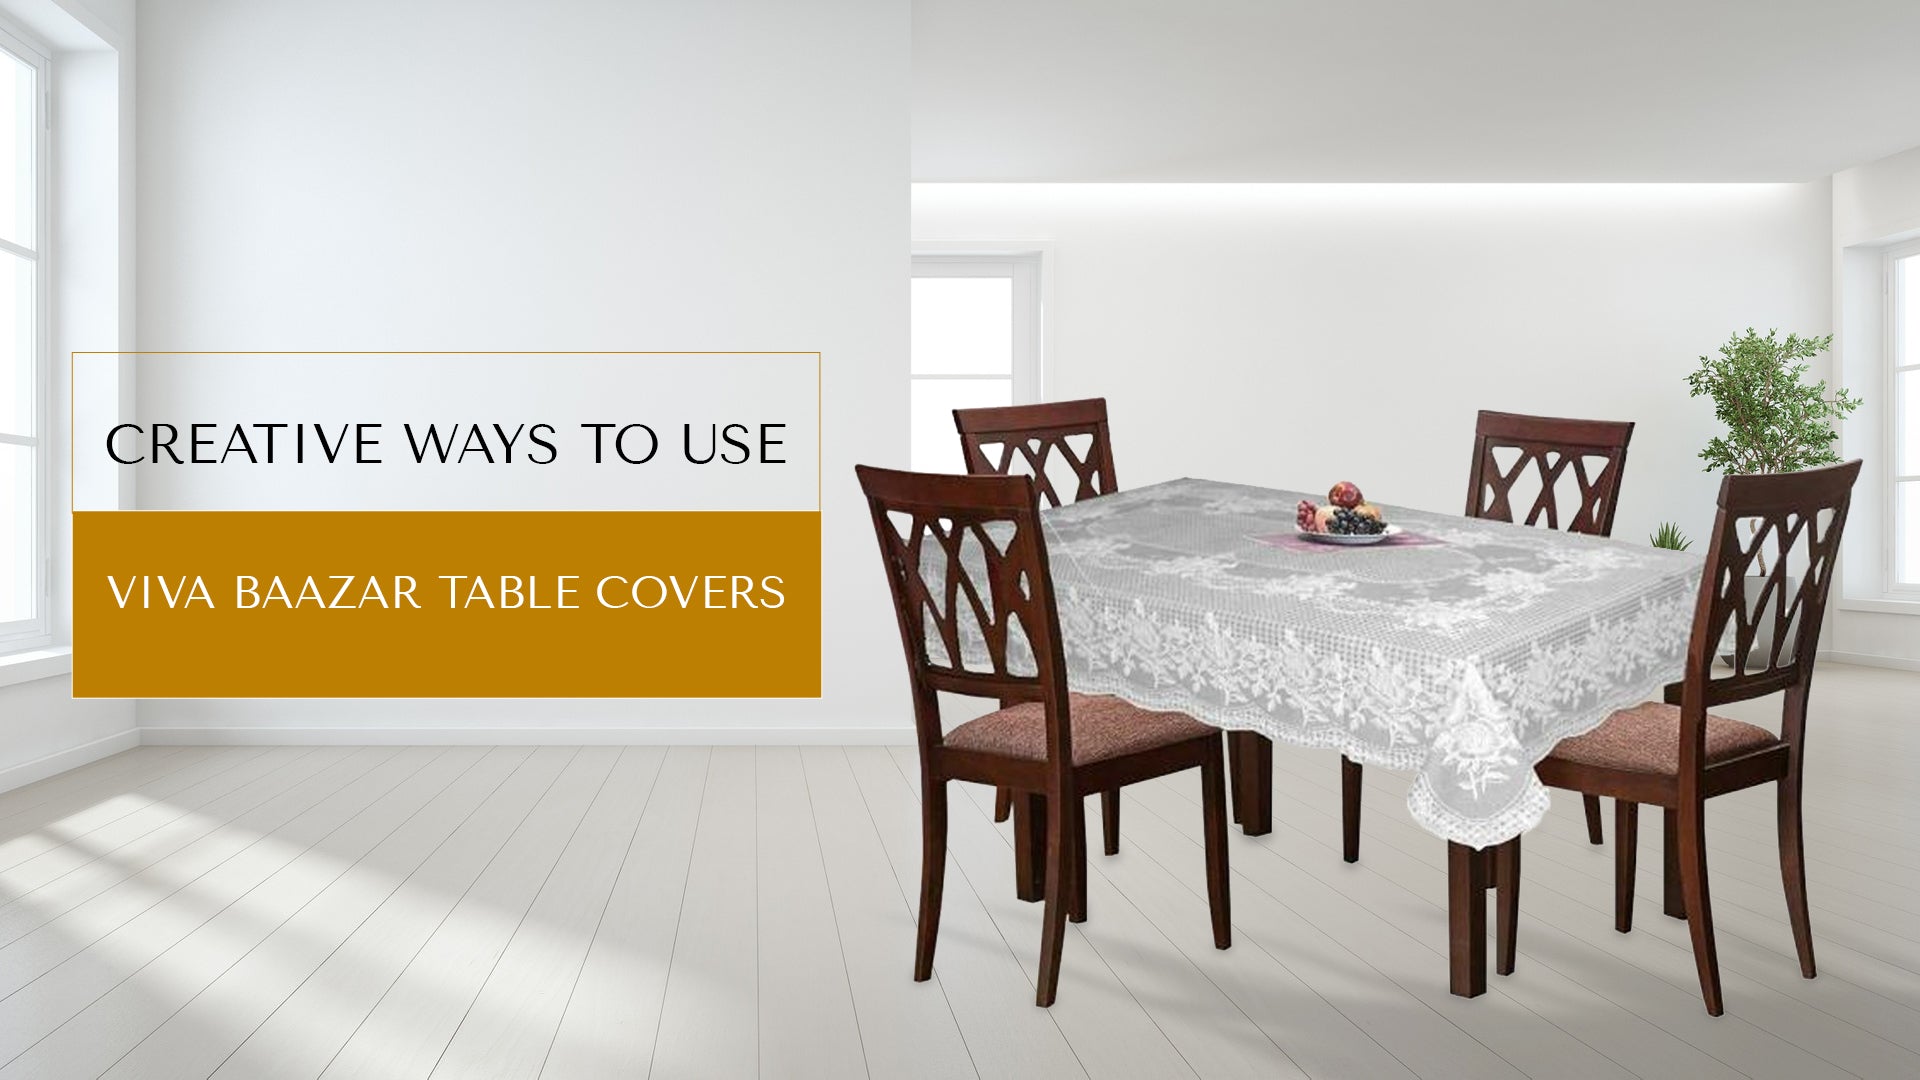 How To Decorate With Tables Covers: Ideas For Your Party Or Wedding